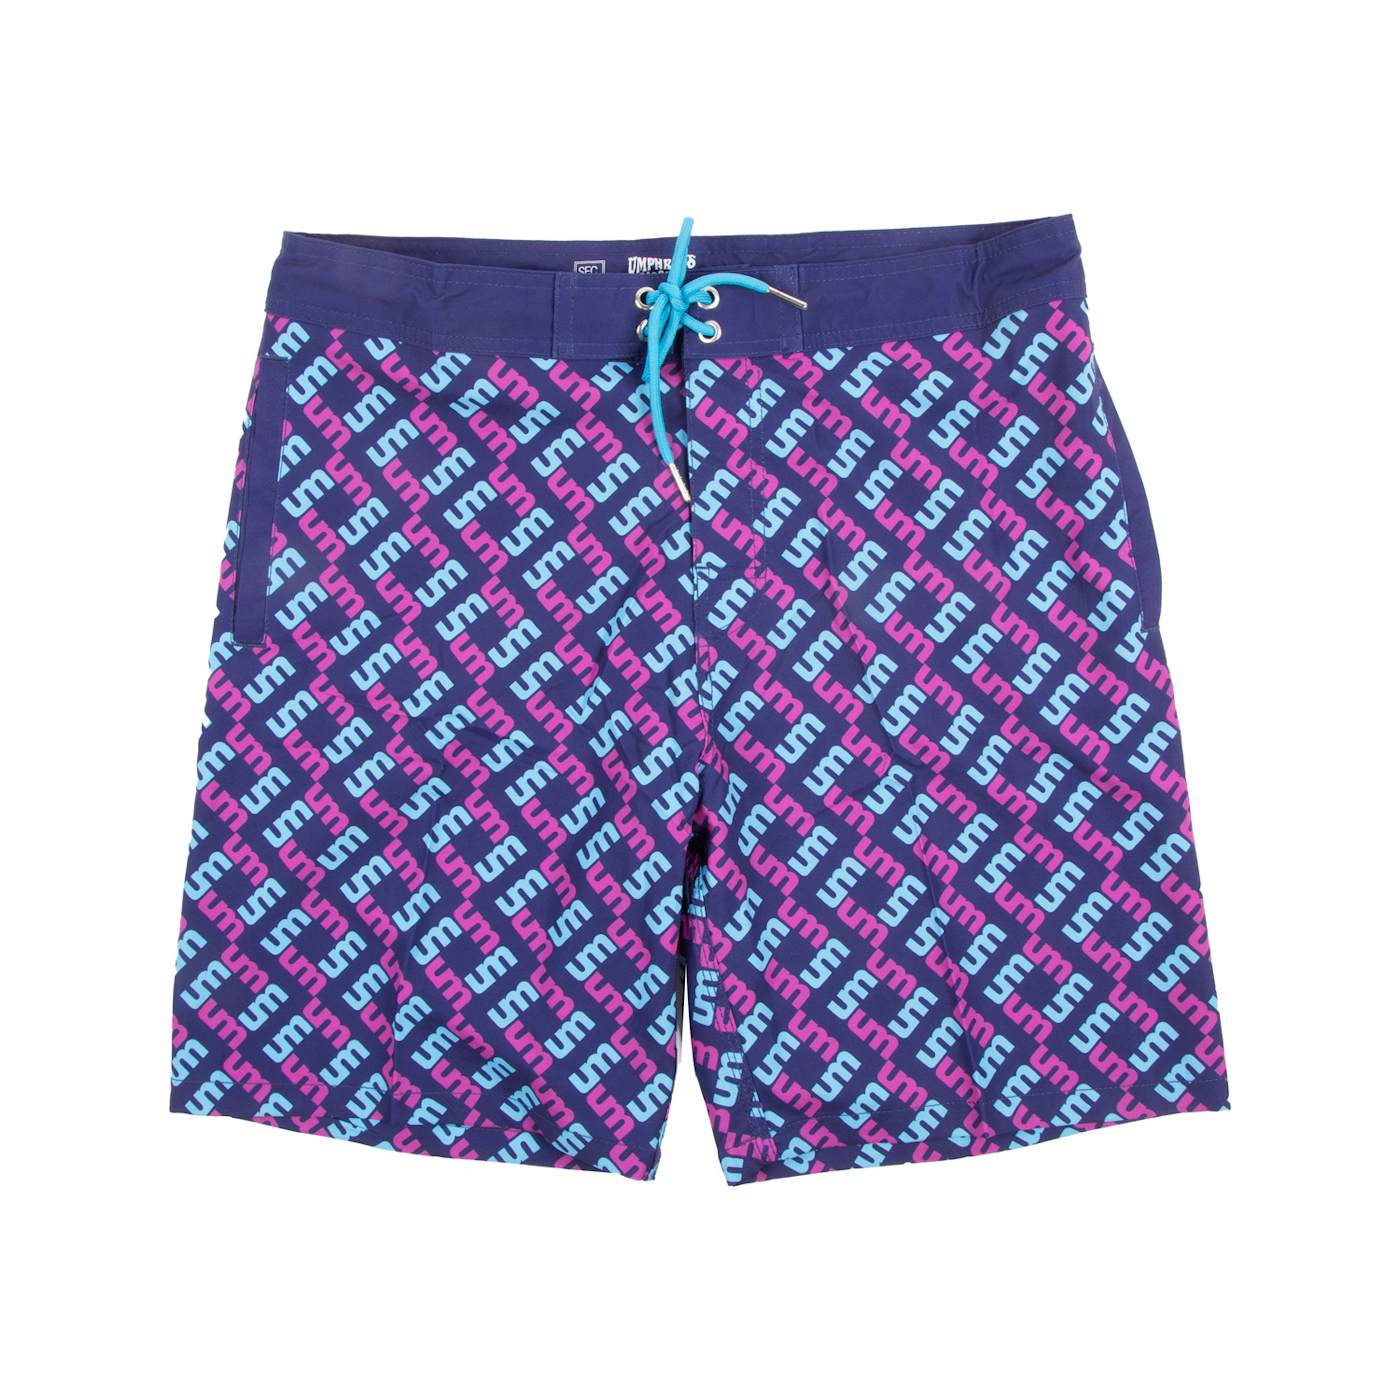 Umphrey's McGee x Section 119 Board Shorts